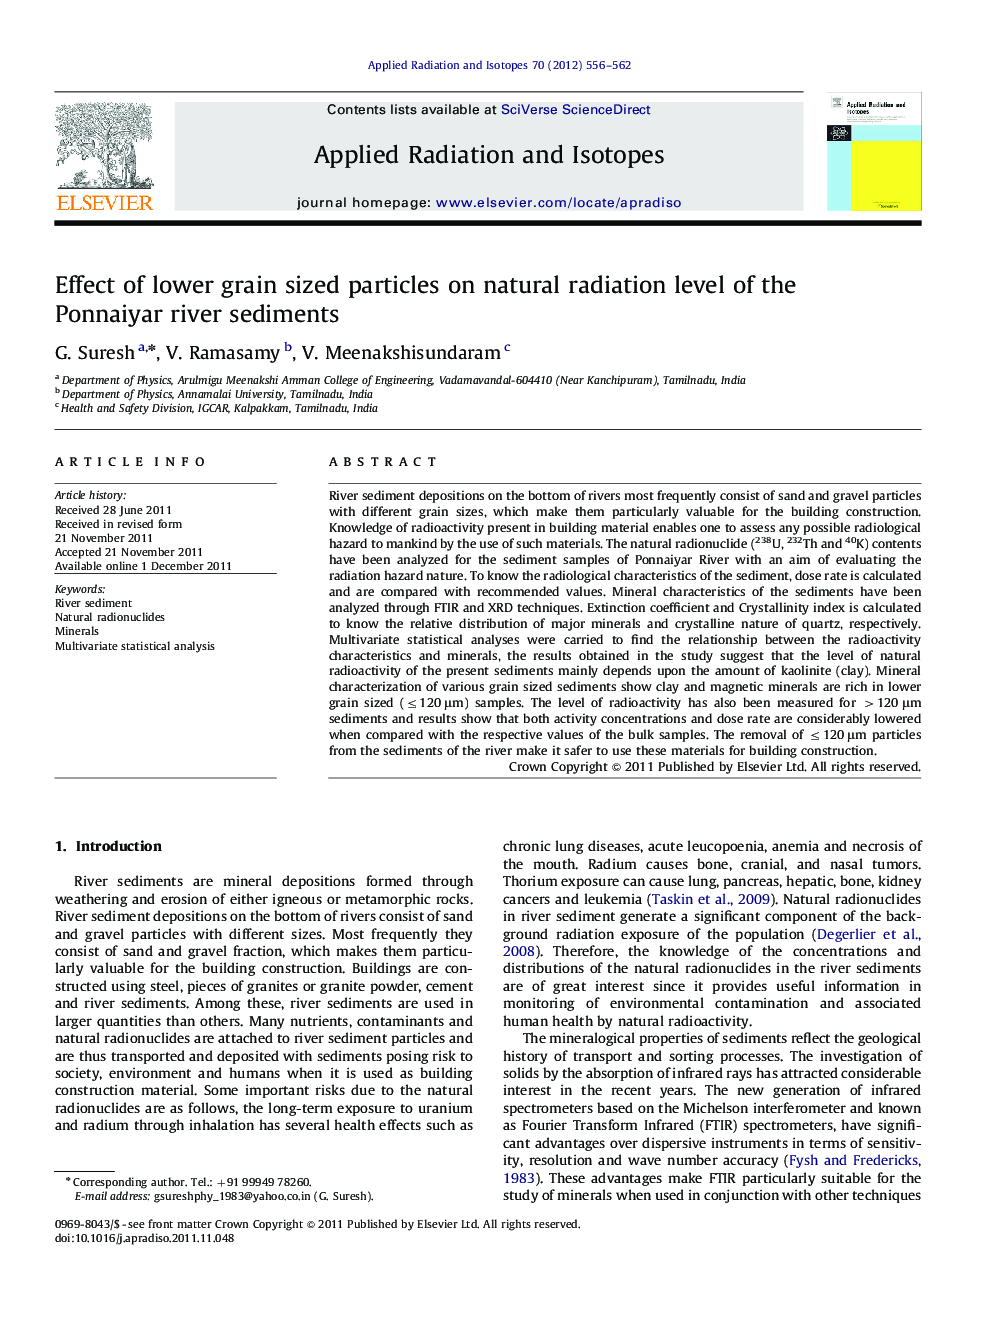 Effect of lower grain sized particles on natural radiation level of the Ponnaiyar river sediments